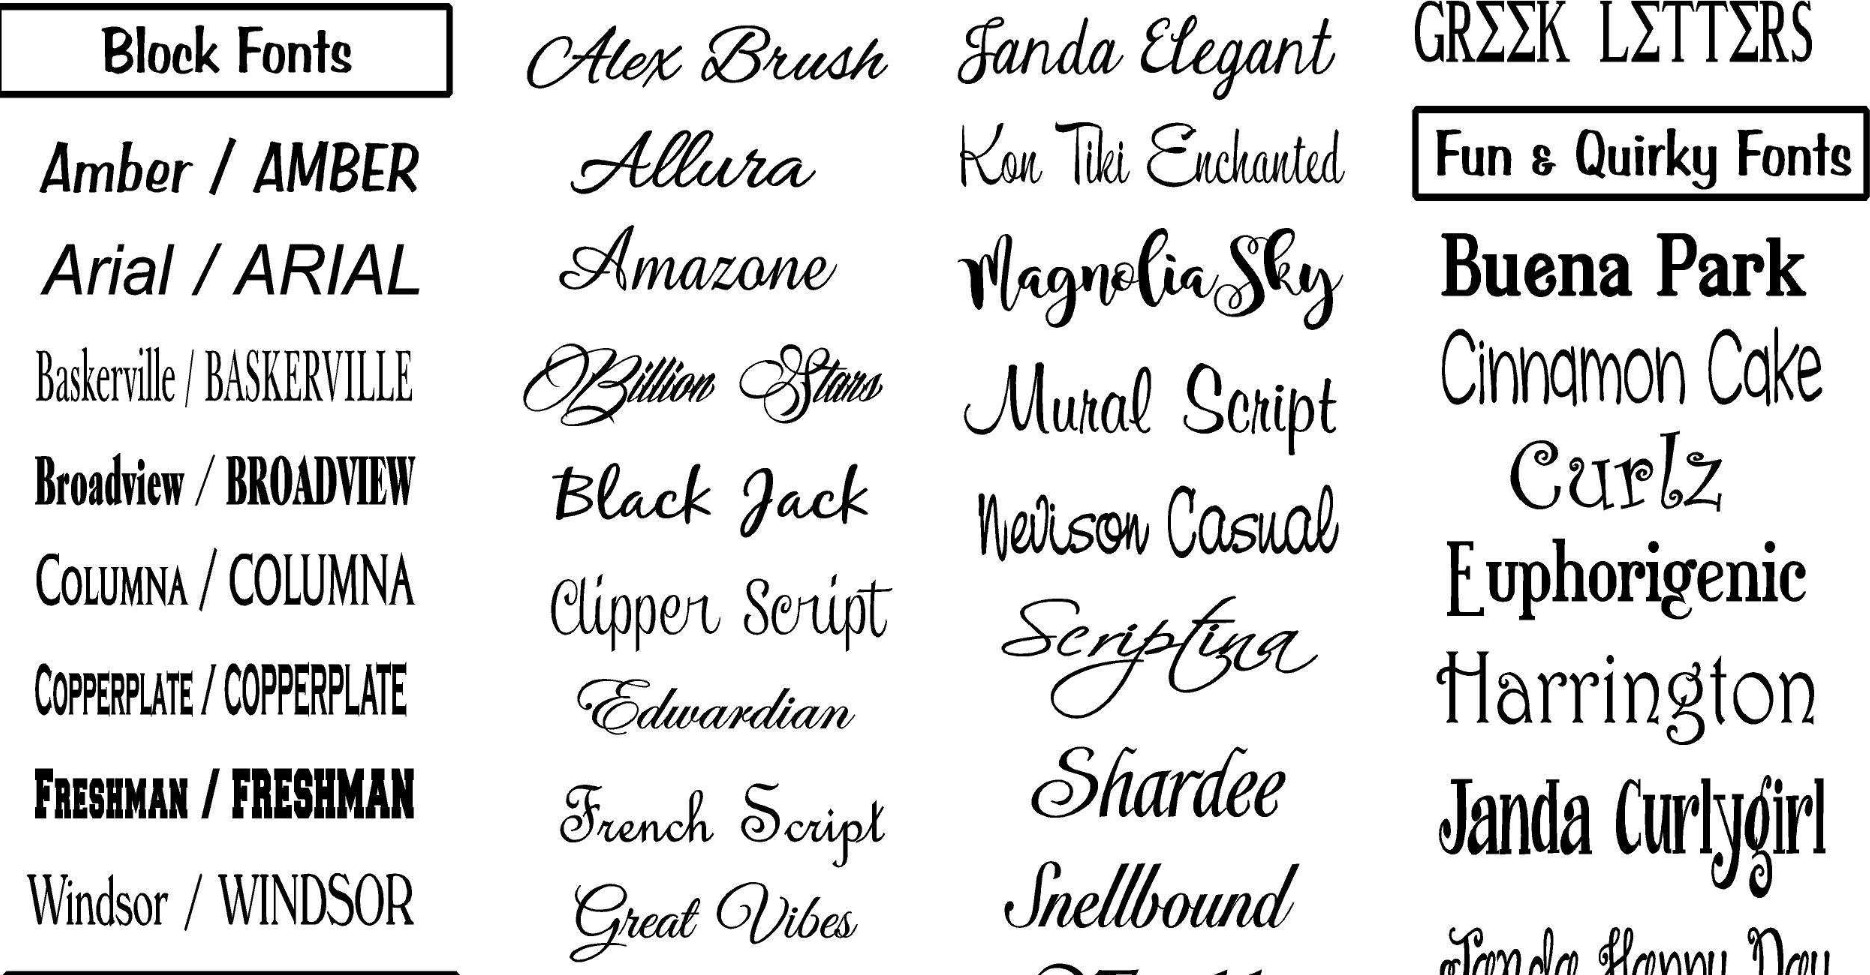 A Guide to Choosing Fonts for Website Headers